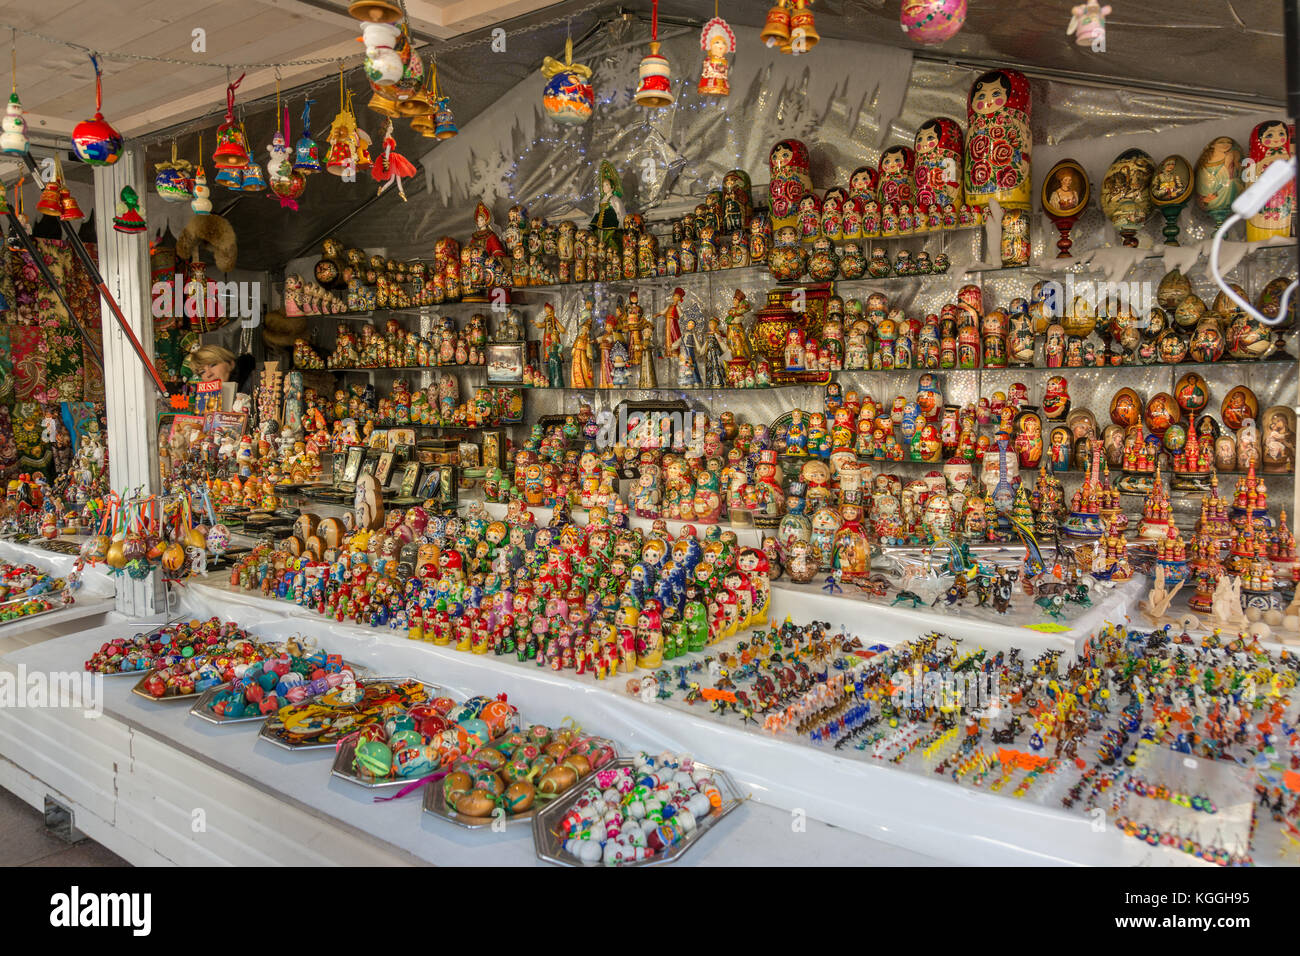 TOULOUSE, FRANCE - NOVEMBER 30, 2016, Stand of matioskas and eggs painted with religious figures, Christmas market in Toulouse, France Stock Photo